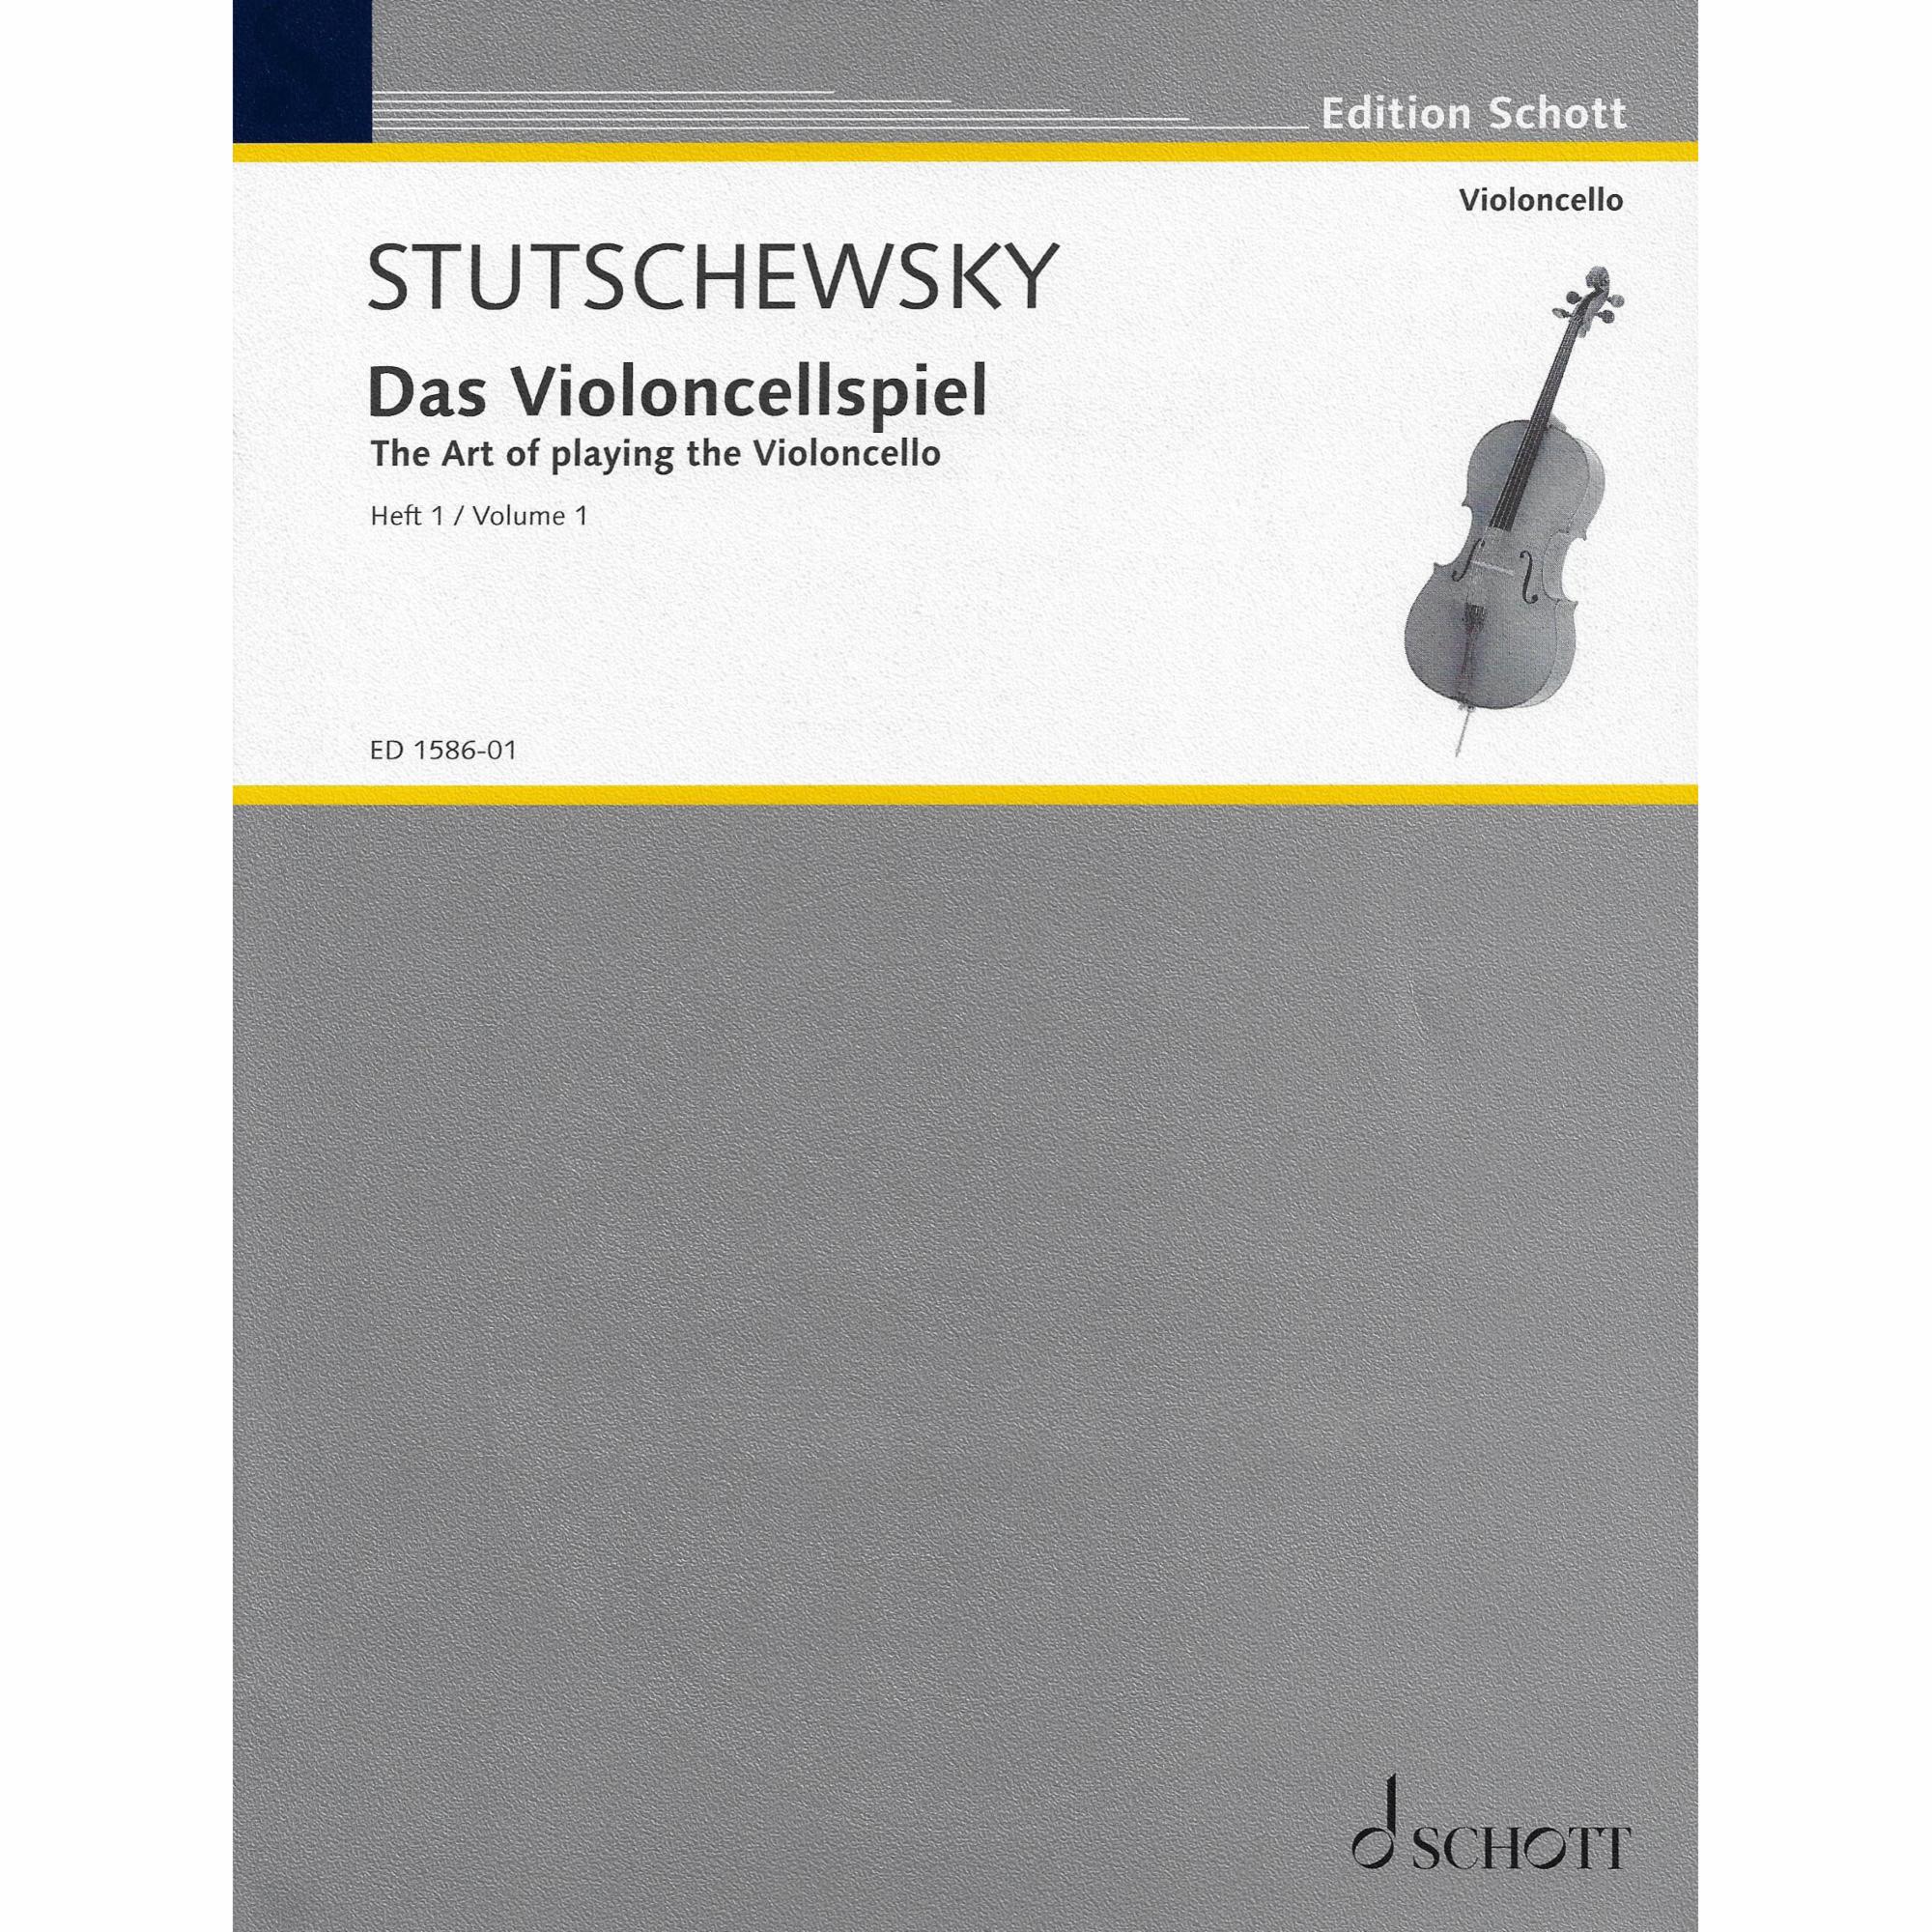 Stutschewsky -- The Art of Playing the Cello, Volumes 1-3